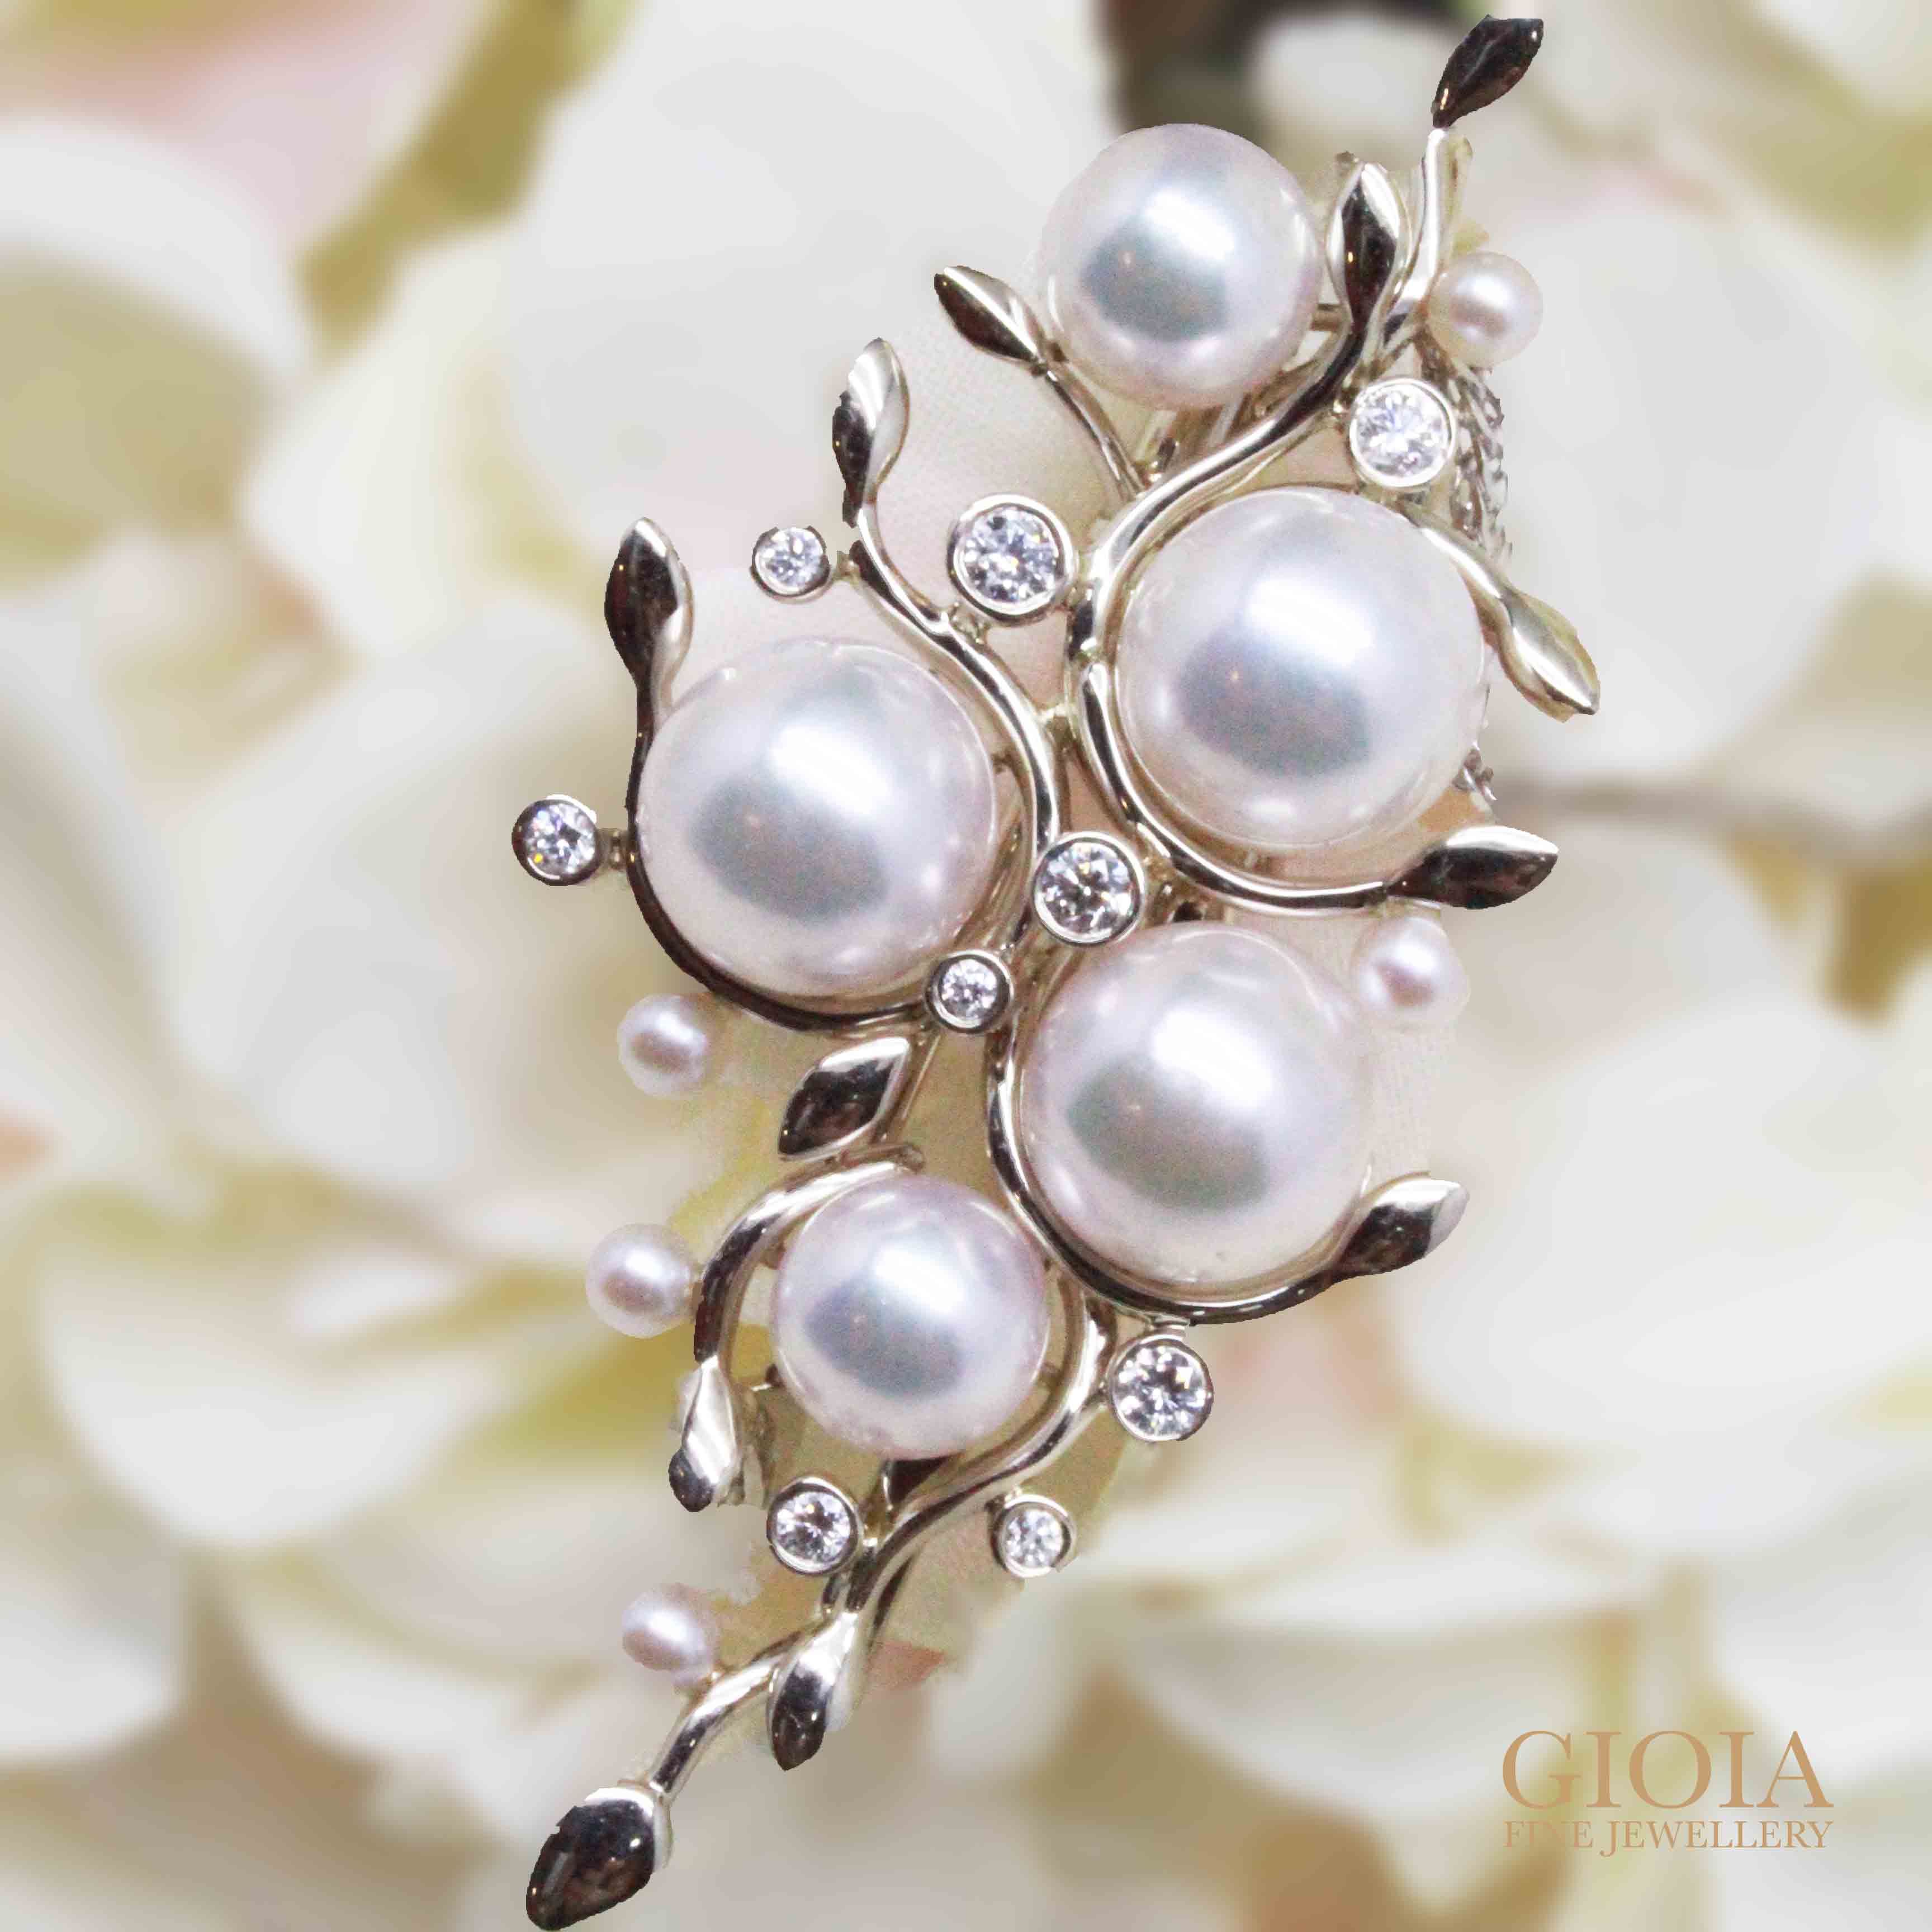 Customised pendant brooch with akoya pearls with round brilliant diamond